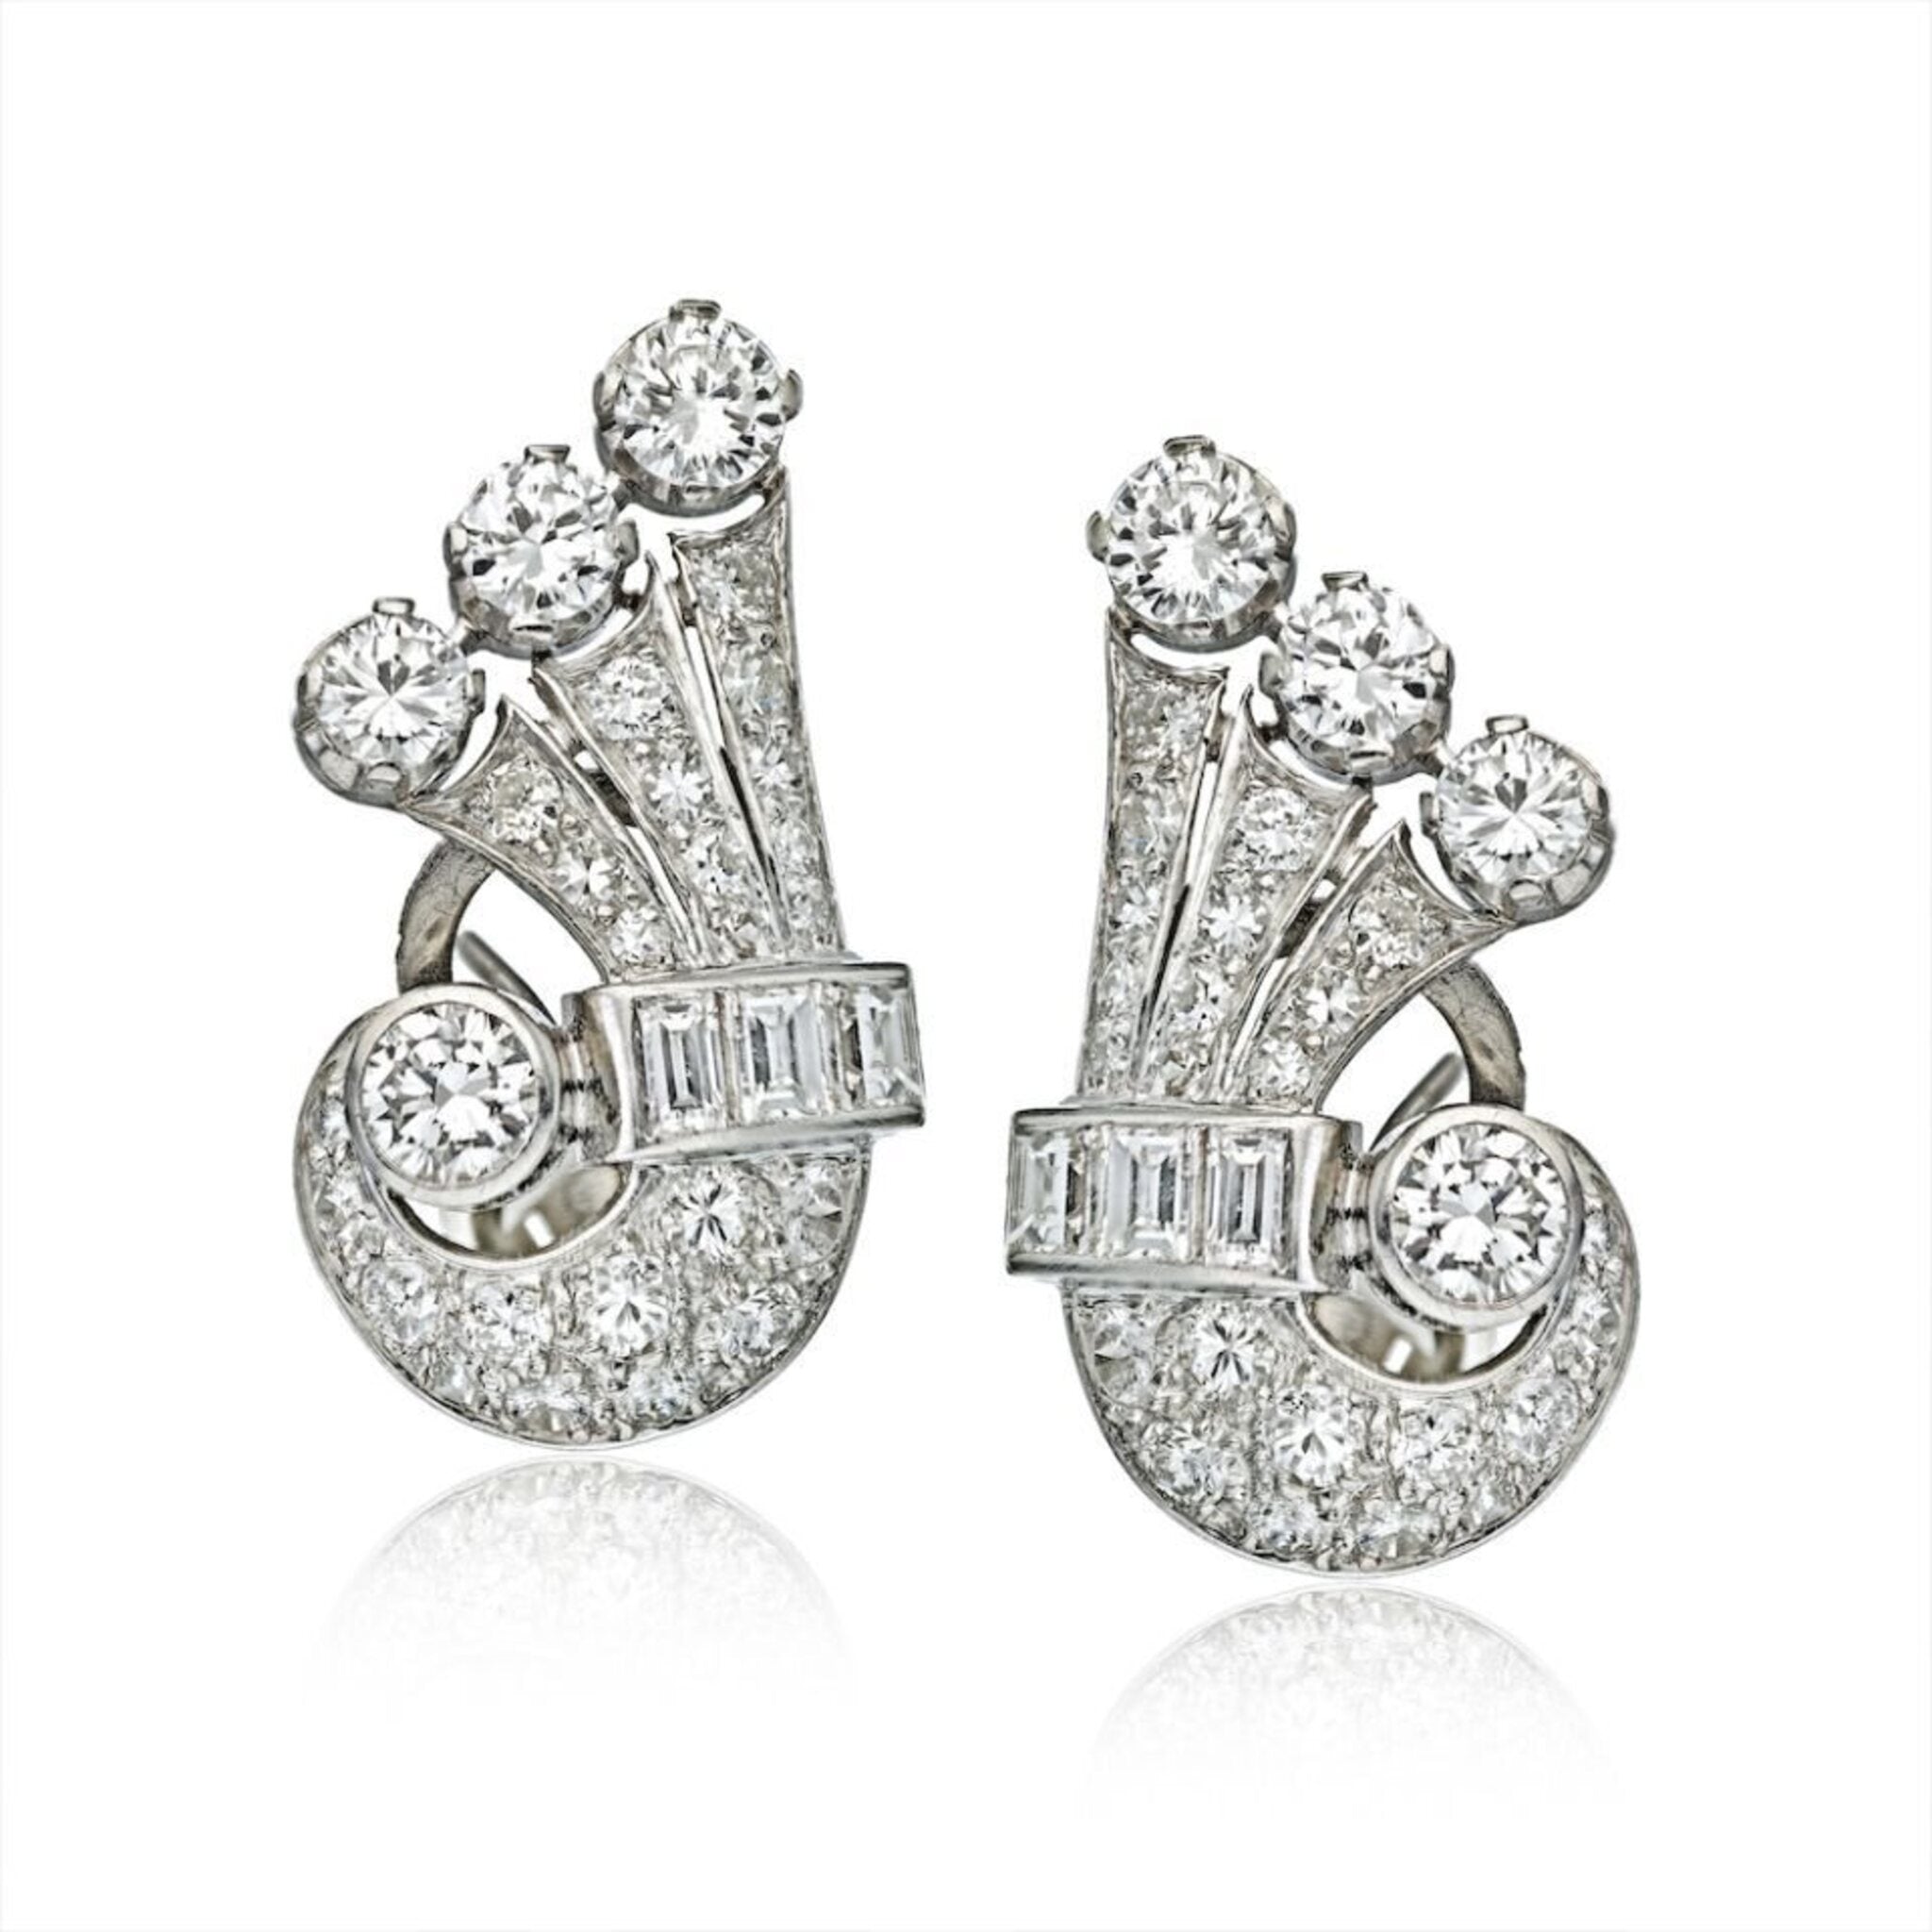 1/2 CT. T.W. Certified Diamond Solitaire Stud Earrings in 14K White Gold  (I/VS2) | Zales Outlet